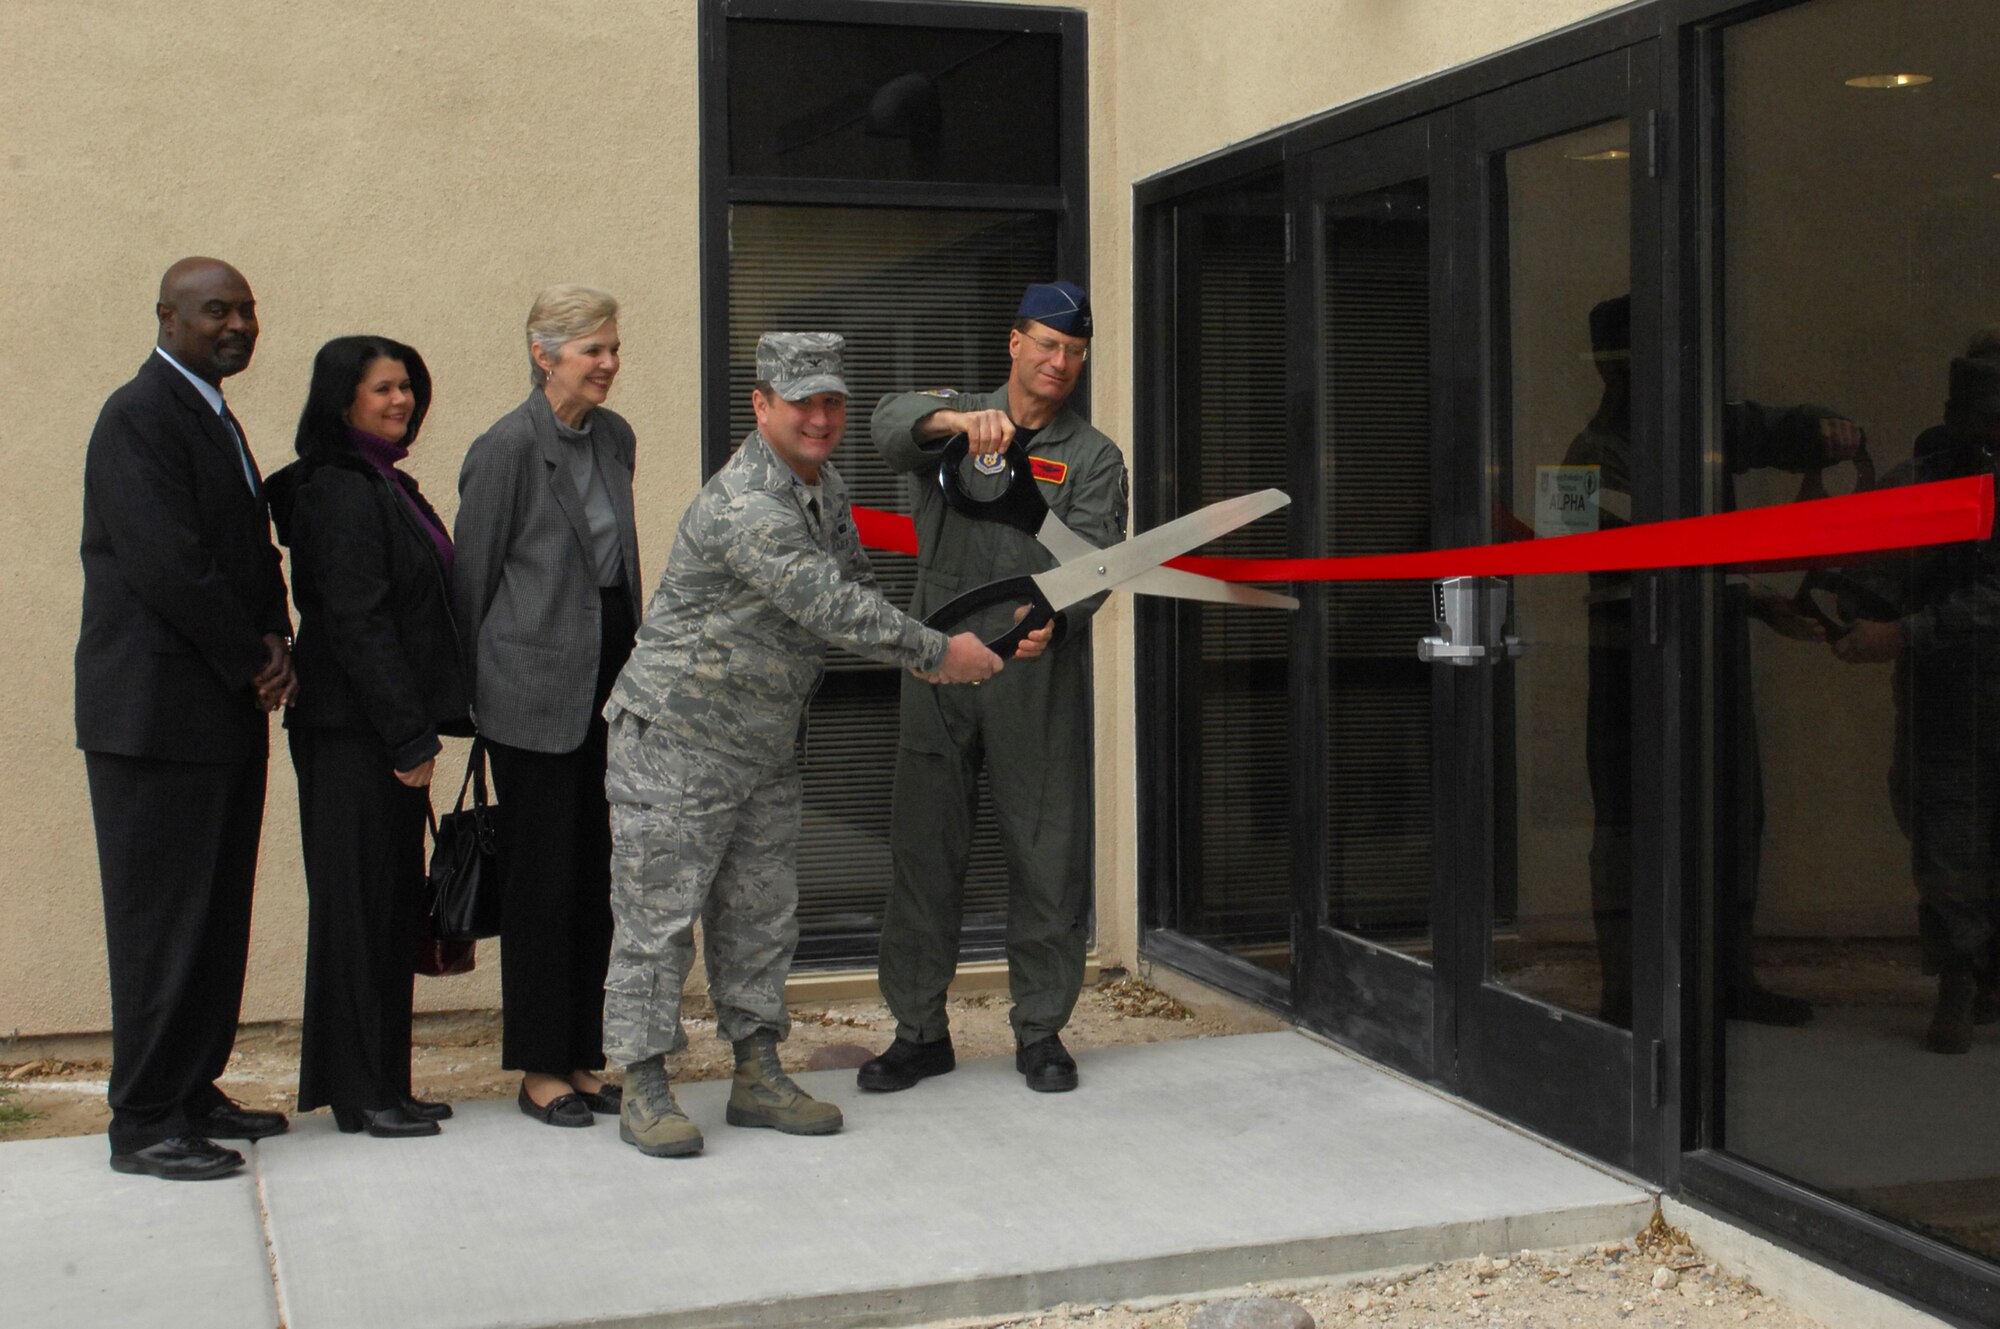 (Right to left) Col. Herman Brunke, 926th Group commander, and Col. Steven Winklmann, 99th Air Base Wing vice commander, cut the ribbon signifying the official opening of the 926th GP’s headquarters building, while observed by Ms. Margot Allen of Senator Ensign’s office, Ms. Roxane Unverrich of Congresswoman Berkley’s office and Mr. Robert Sharp of Senator Reid’s office. The new facility, along with an adjacent building, houses all of the group’s Nellis personnel in one location. (U.S. Air Force photo/Staff Sgt. Erin Worley)